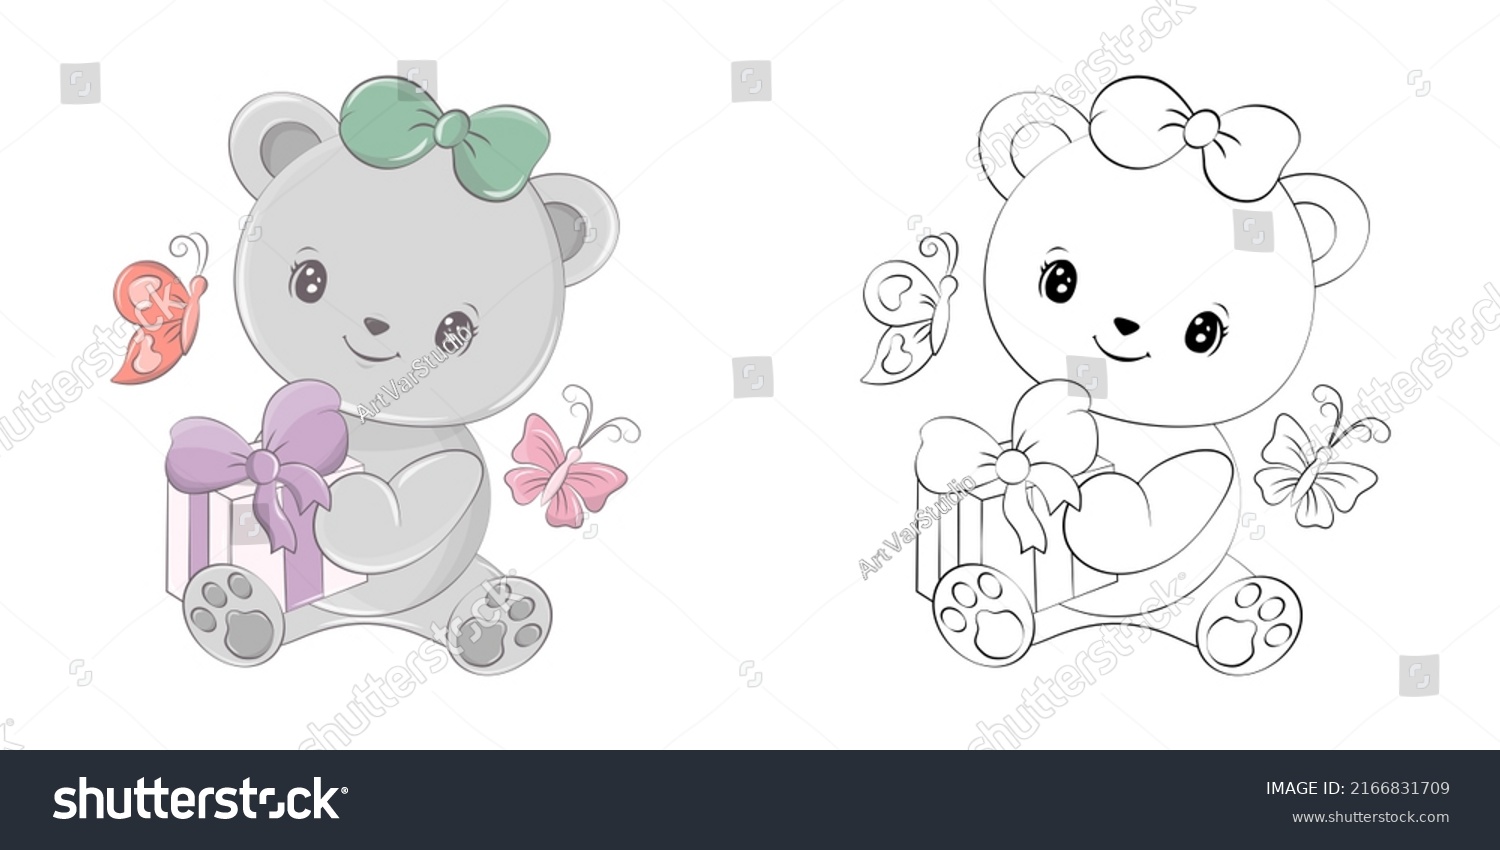 SVG of Cute Bear Clipart Illustration and Black and White. Funny Clip Art Bear with Gift Box. Vector Illustration of an Animal for Coloring Pages, Stickers, Baby Shower, Prints for Clothes.  svg